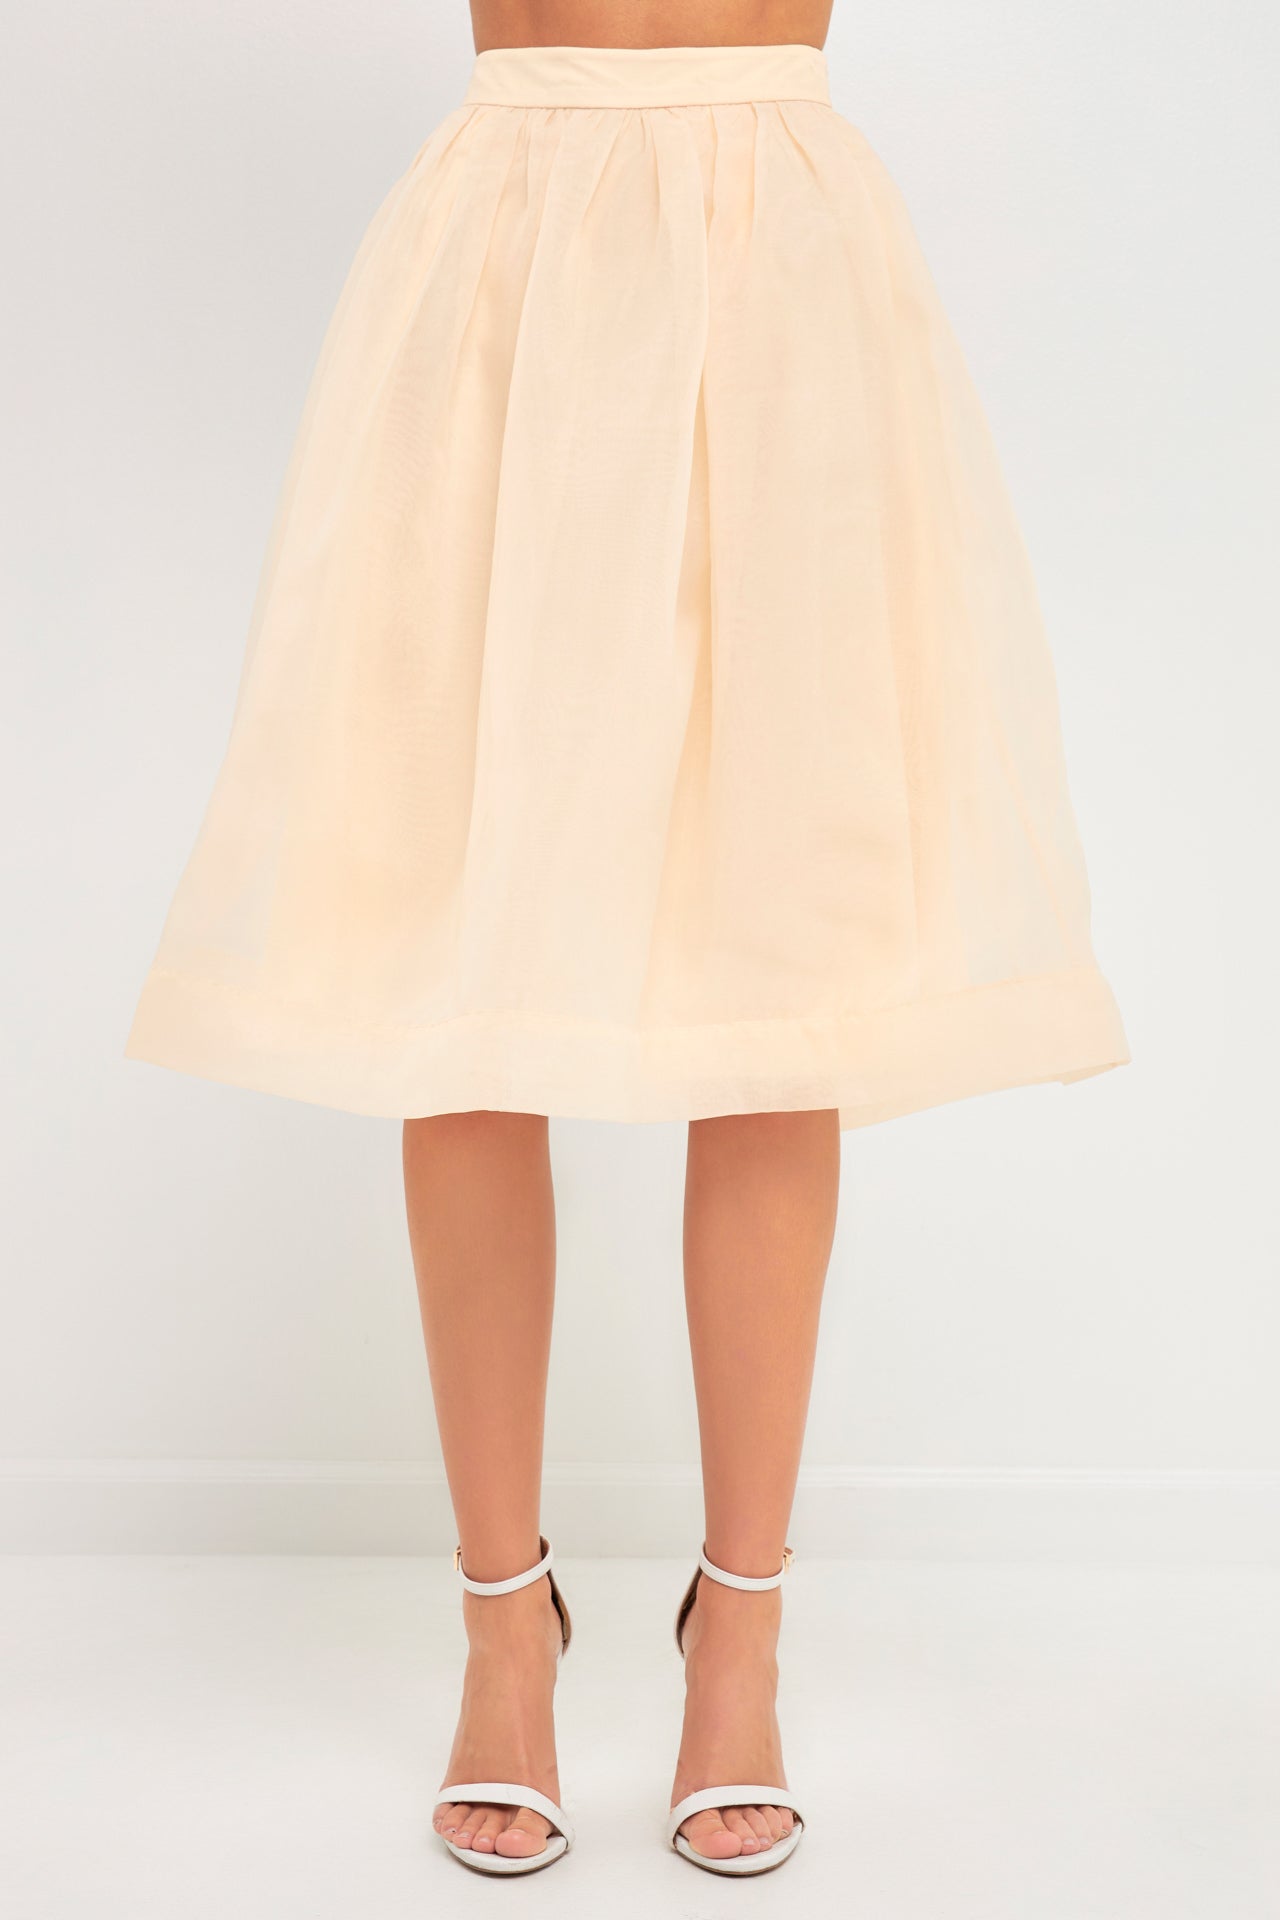 Endless Rose - Organza A Line Midi Skirt - Skirts in Women's Clothing available at endlessrose.com